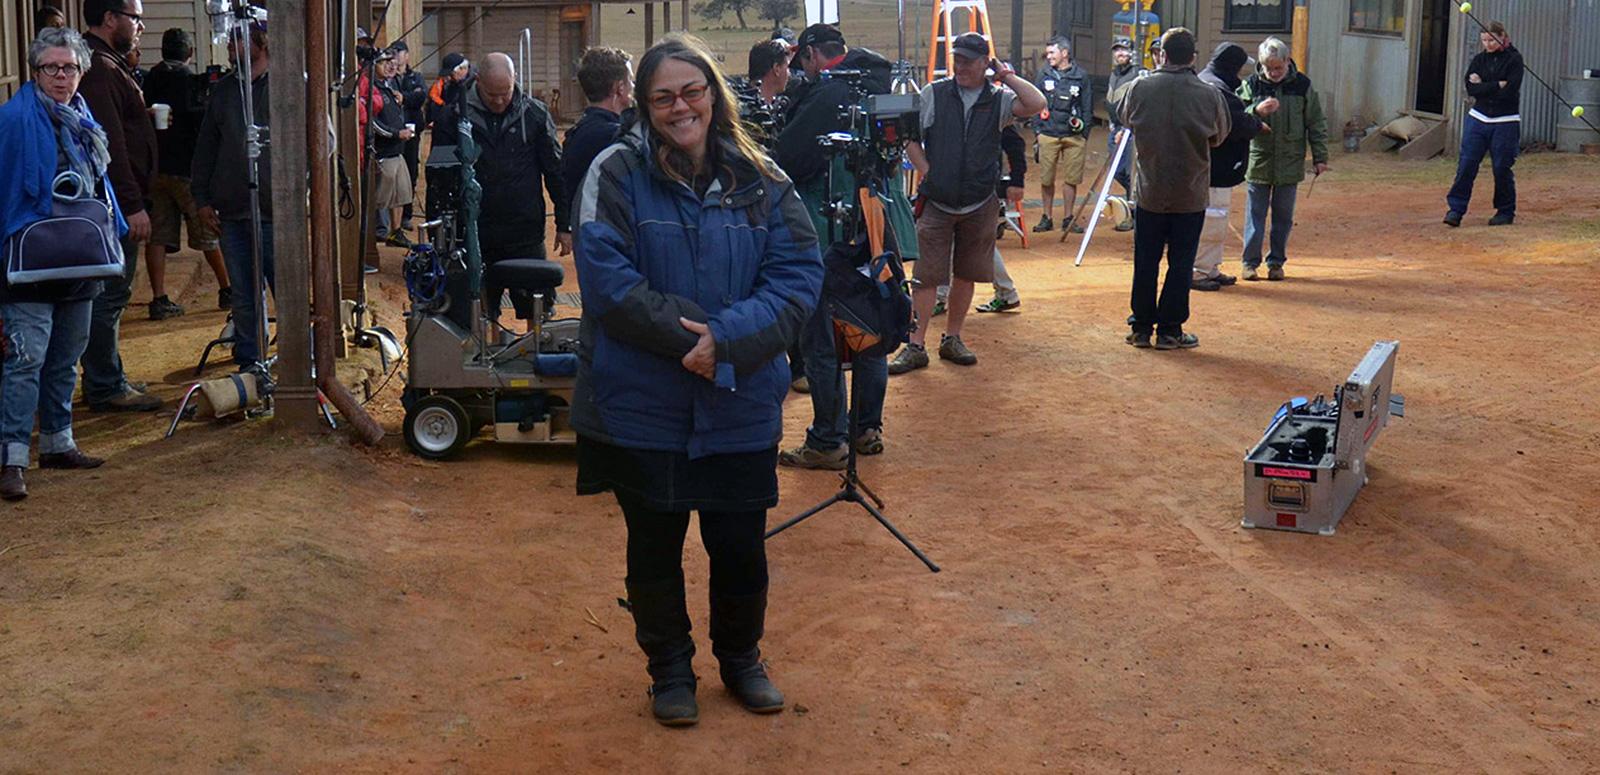 Director Jocelyn Moorhouse on the set of a film. She is looking at the camera while a large film crew are at work behind her. 